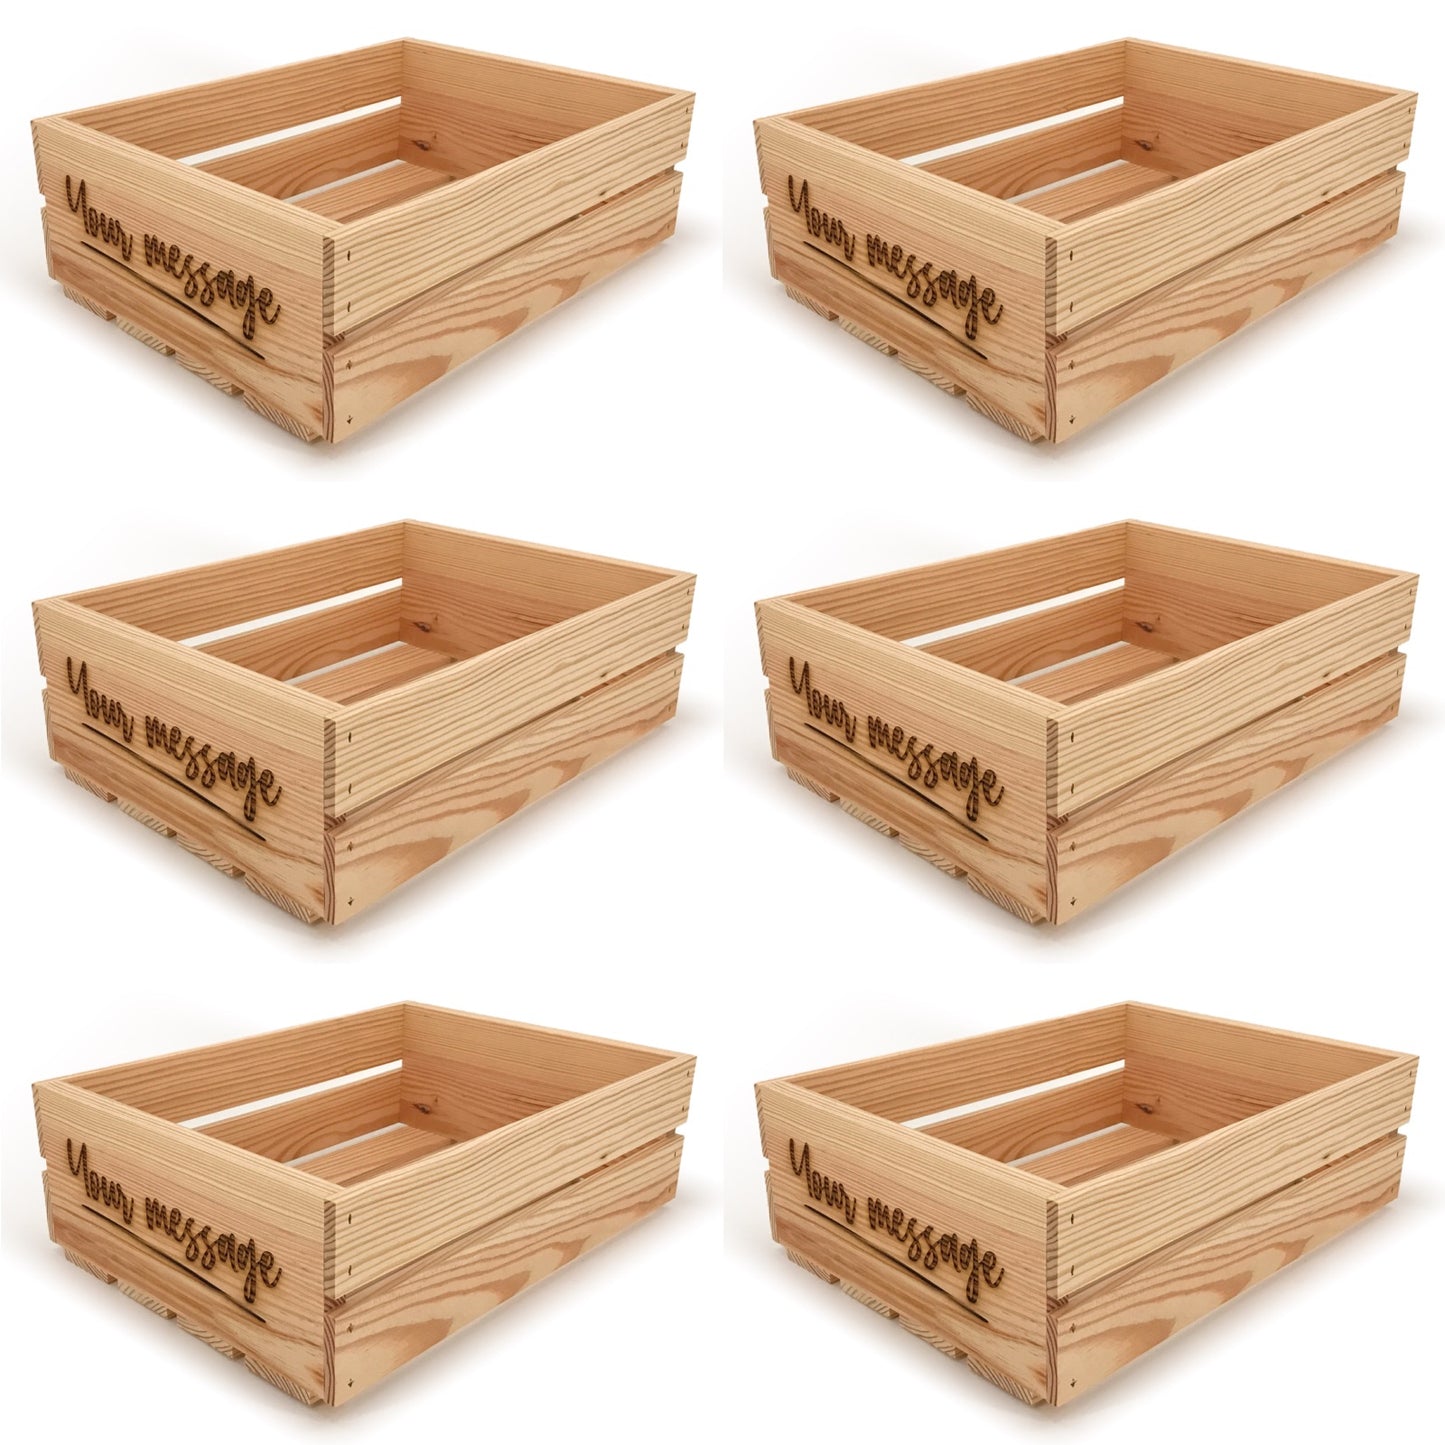 6 Small wooden crates with custom message 16x12x5.25